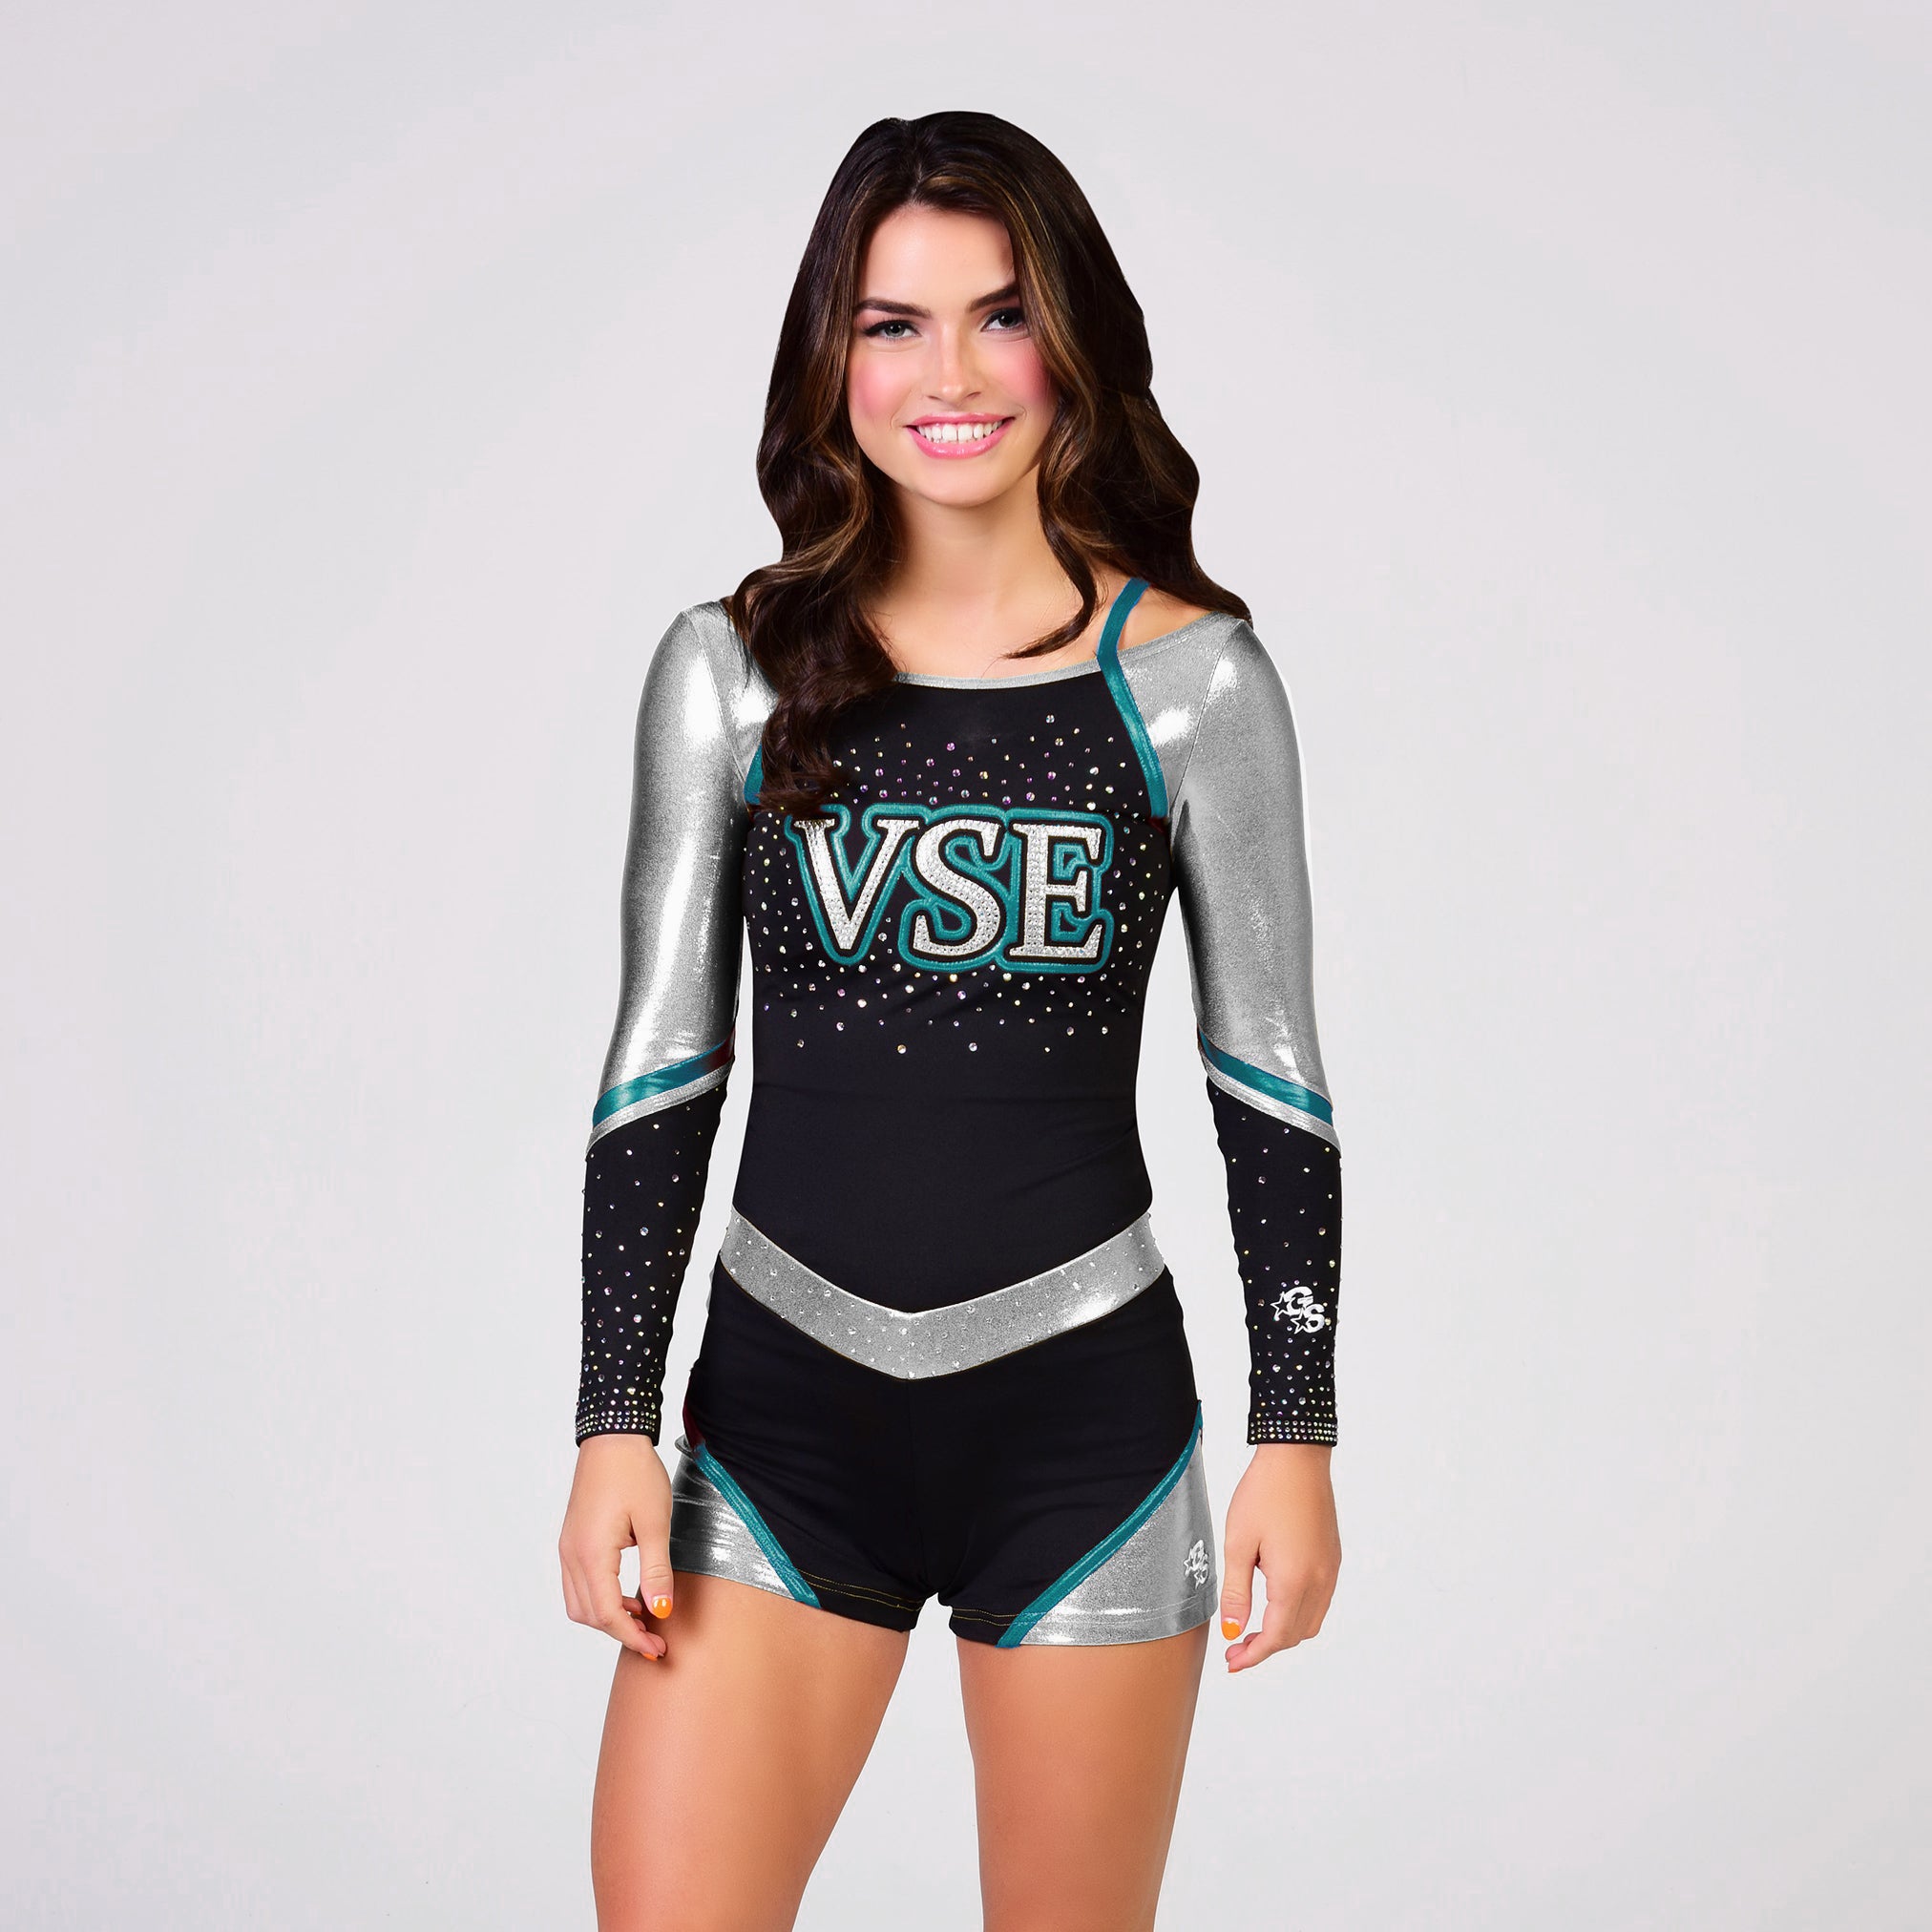 Journey Uniform with Metallic arms and V-waist Shorts - Teal